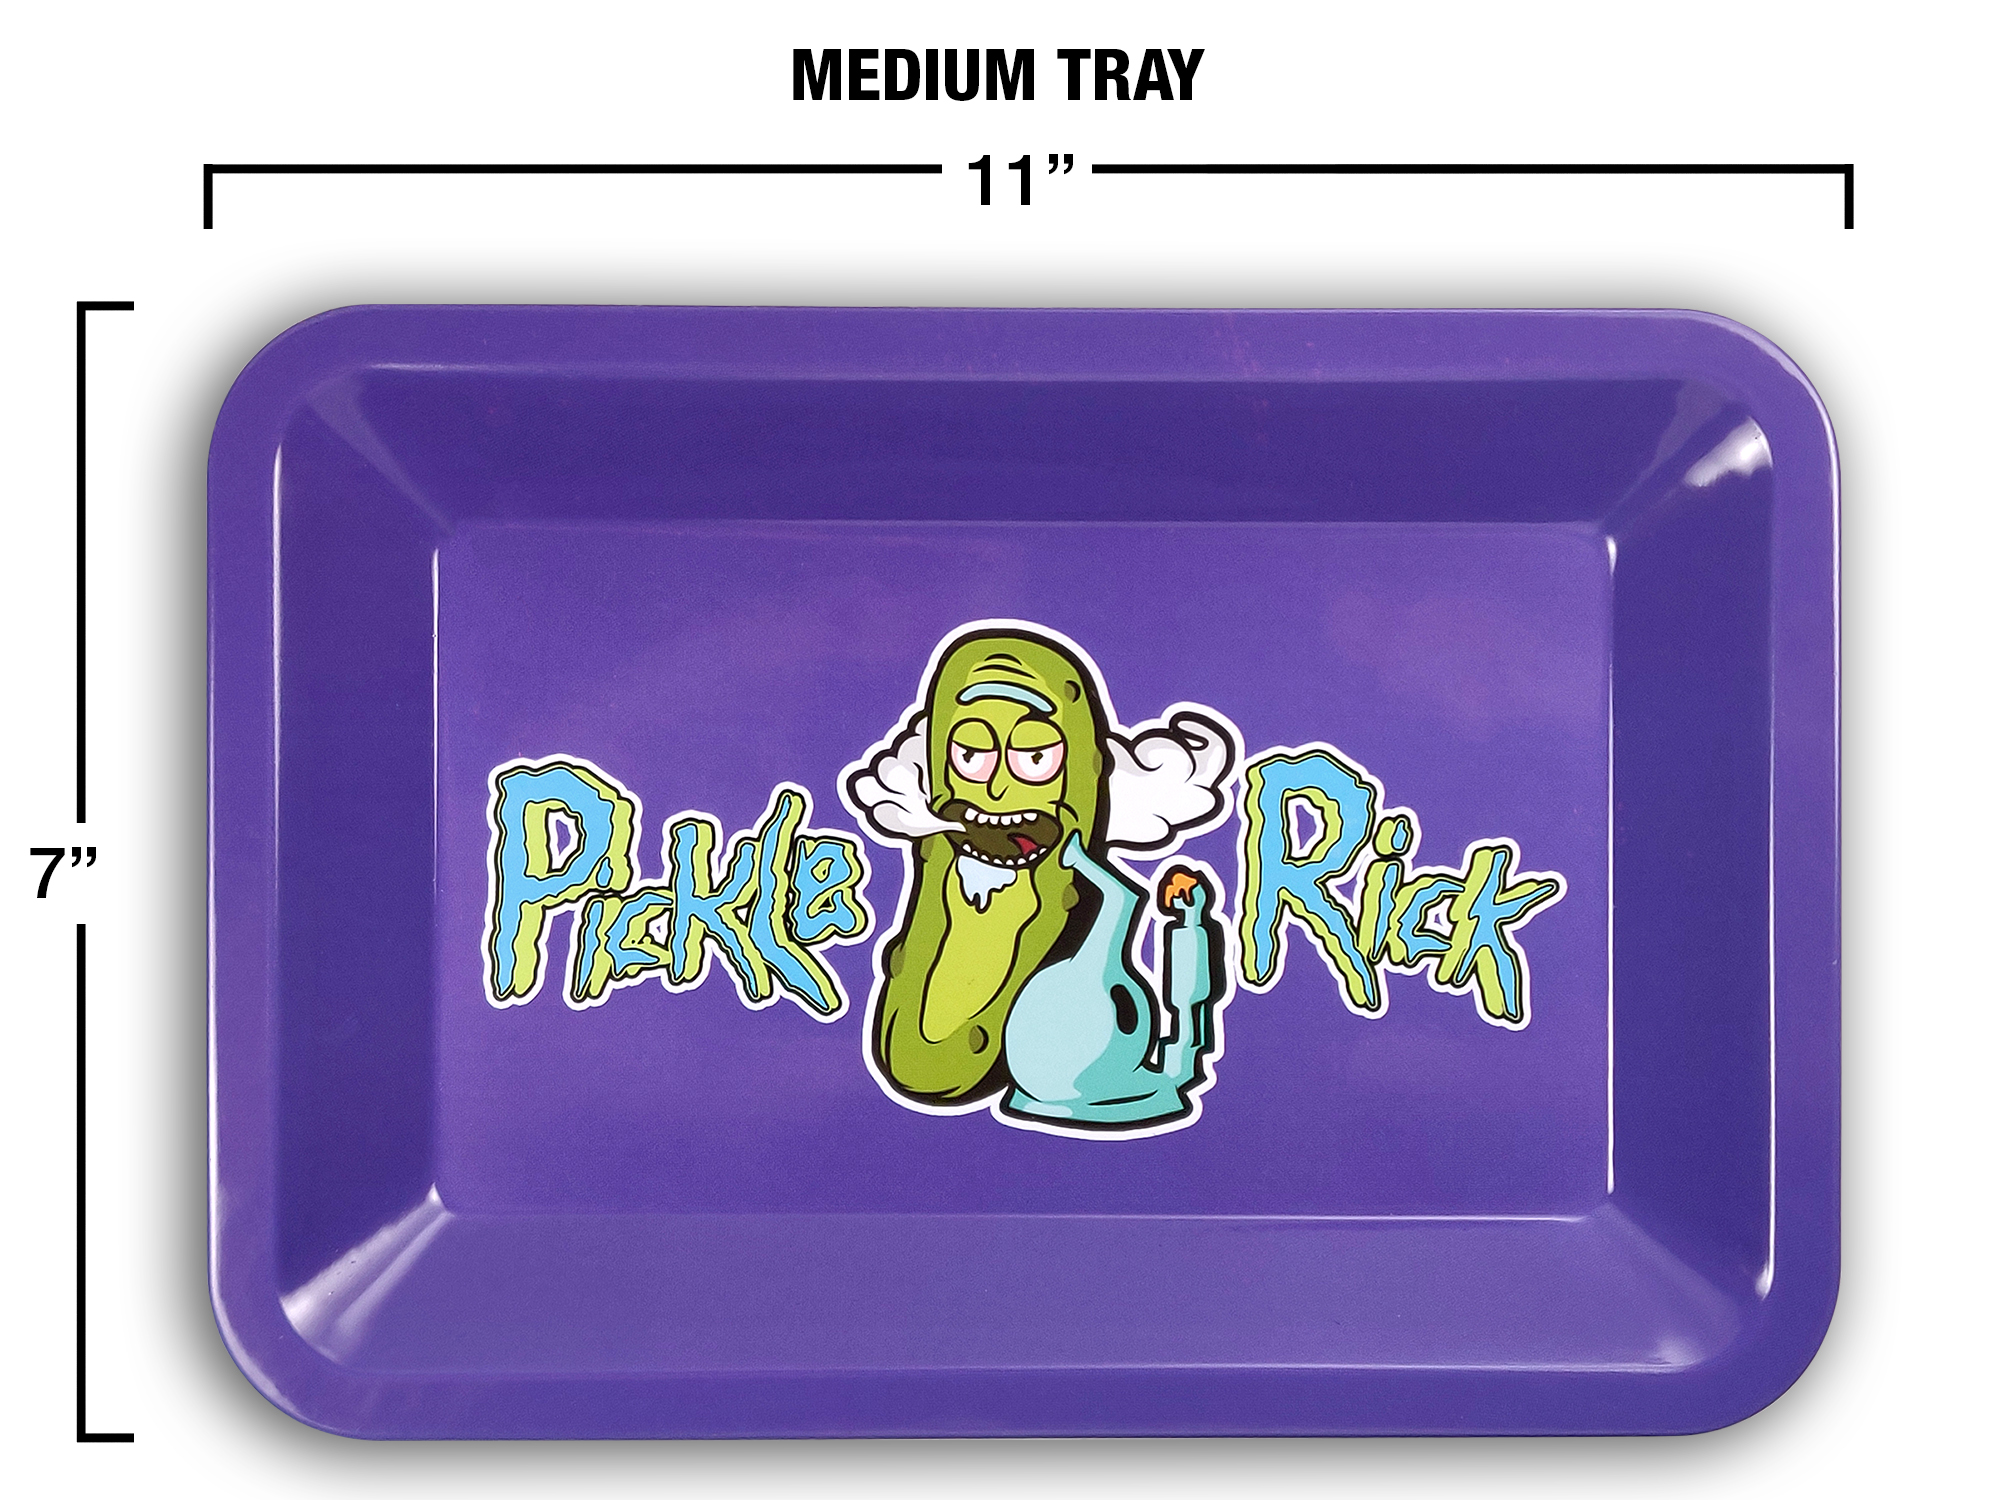 Details about   Rollong Tray Rick And Morty Dazed Medium Size 